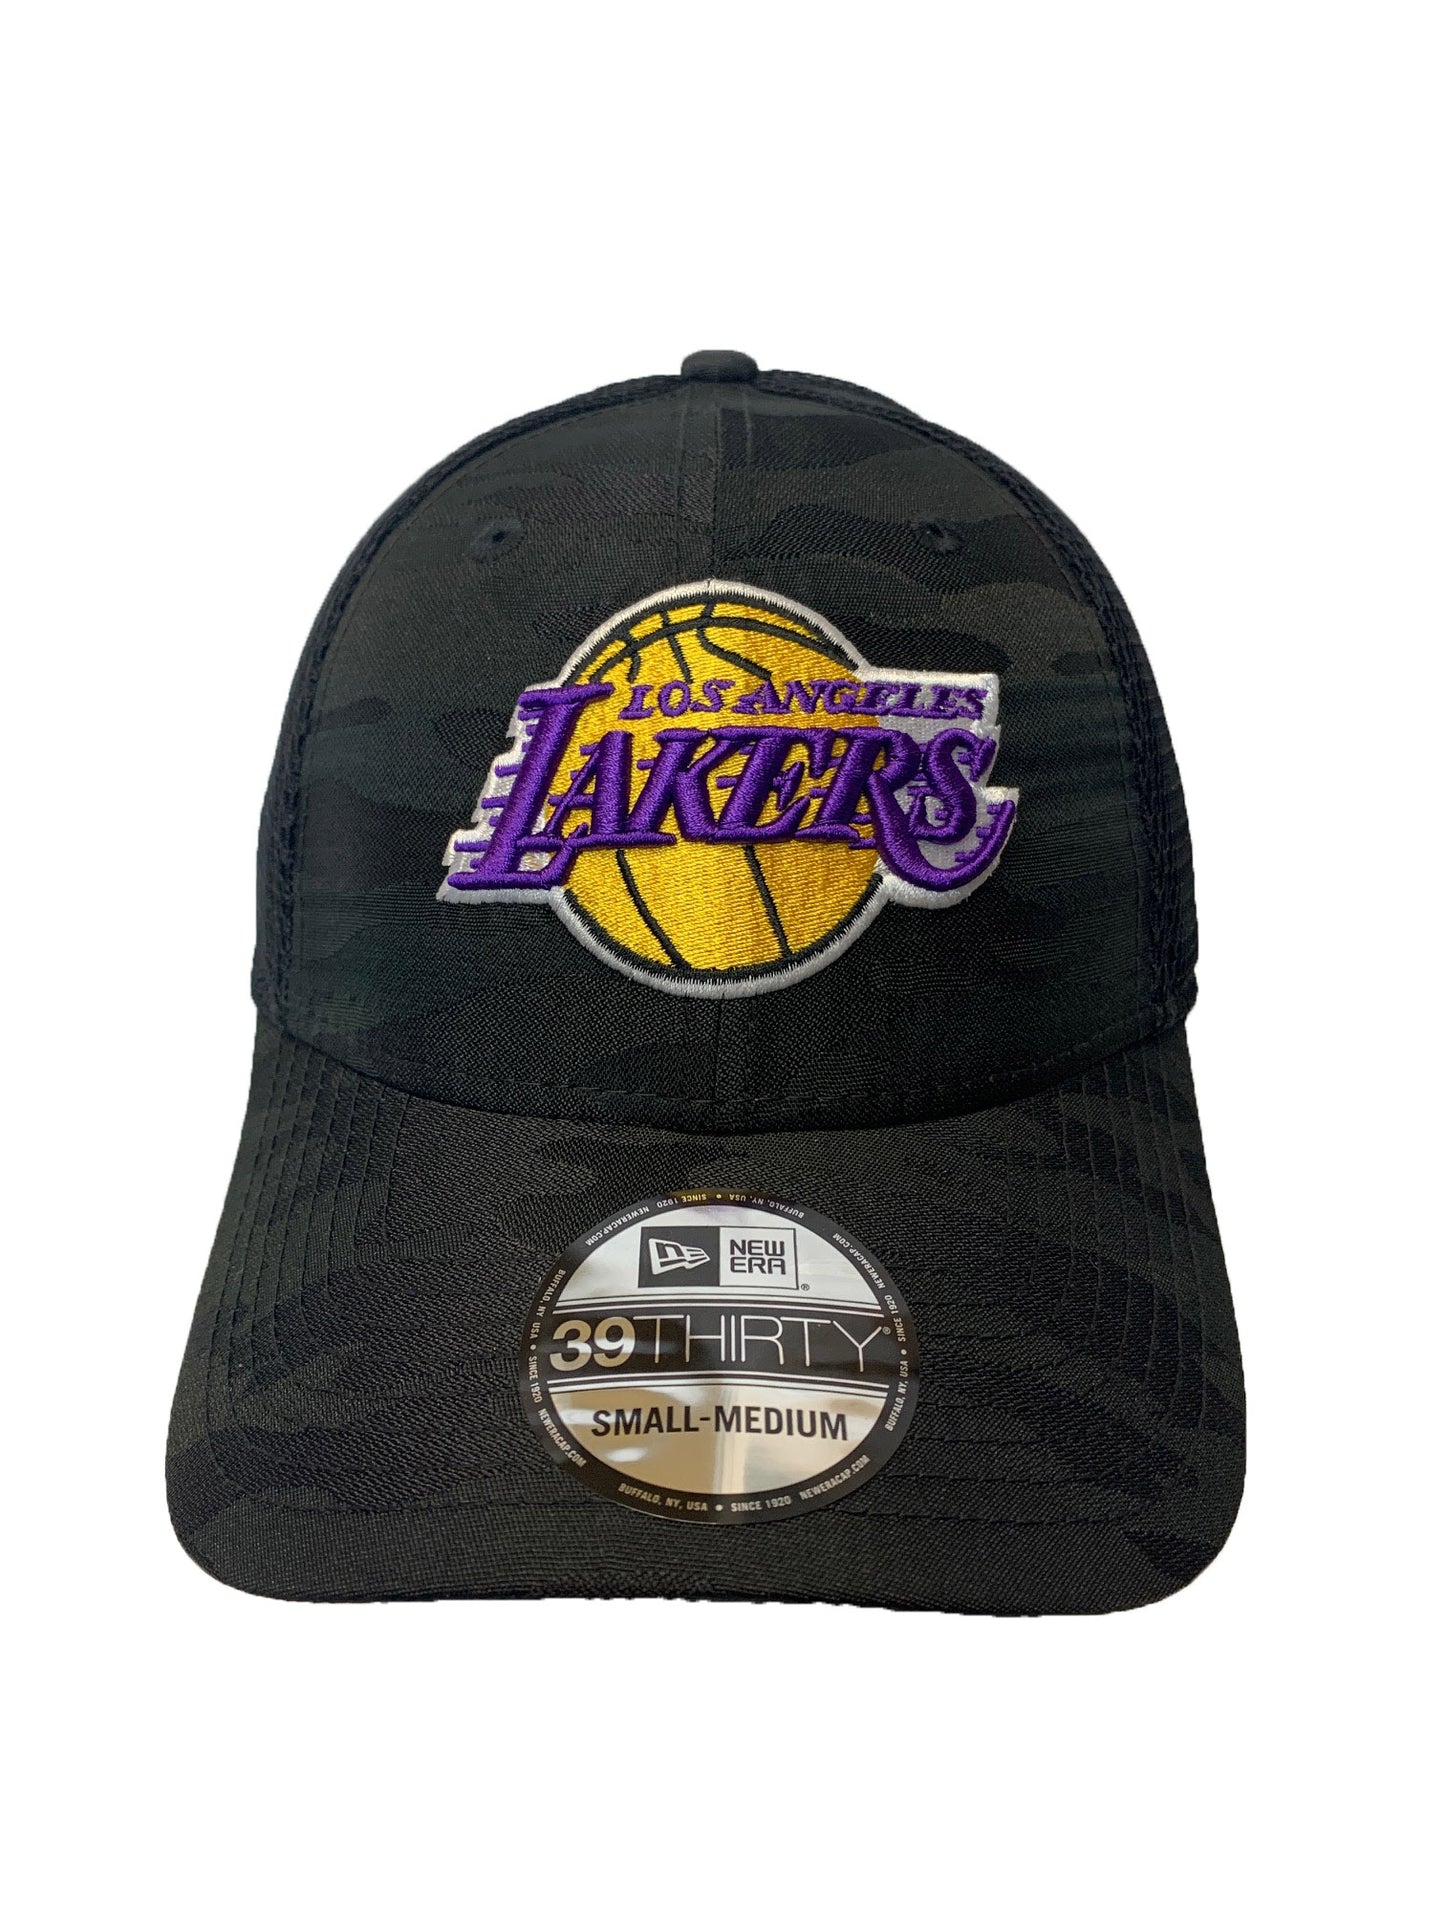 LOS ANGELES LAKERS CAMOTONE 39THIRTY